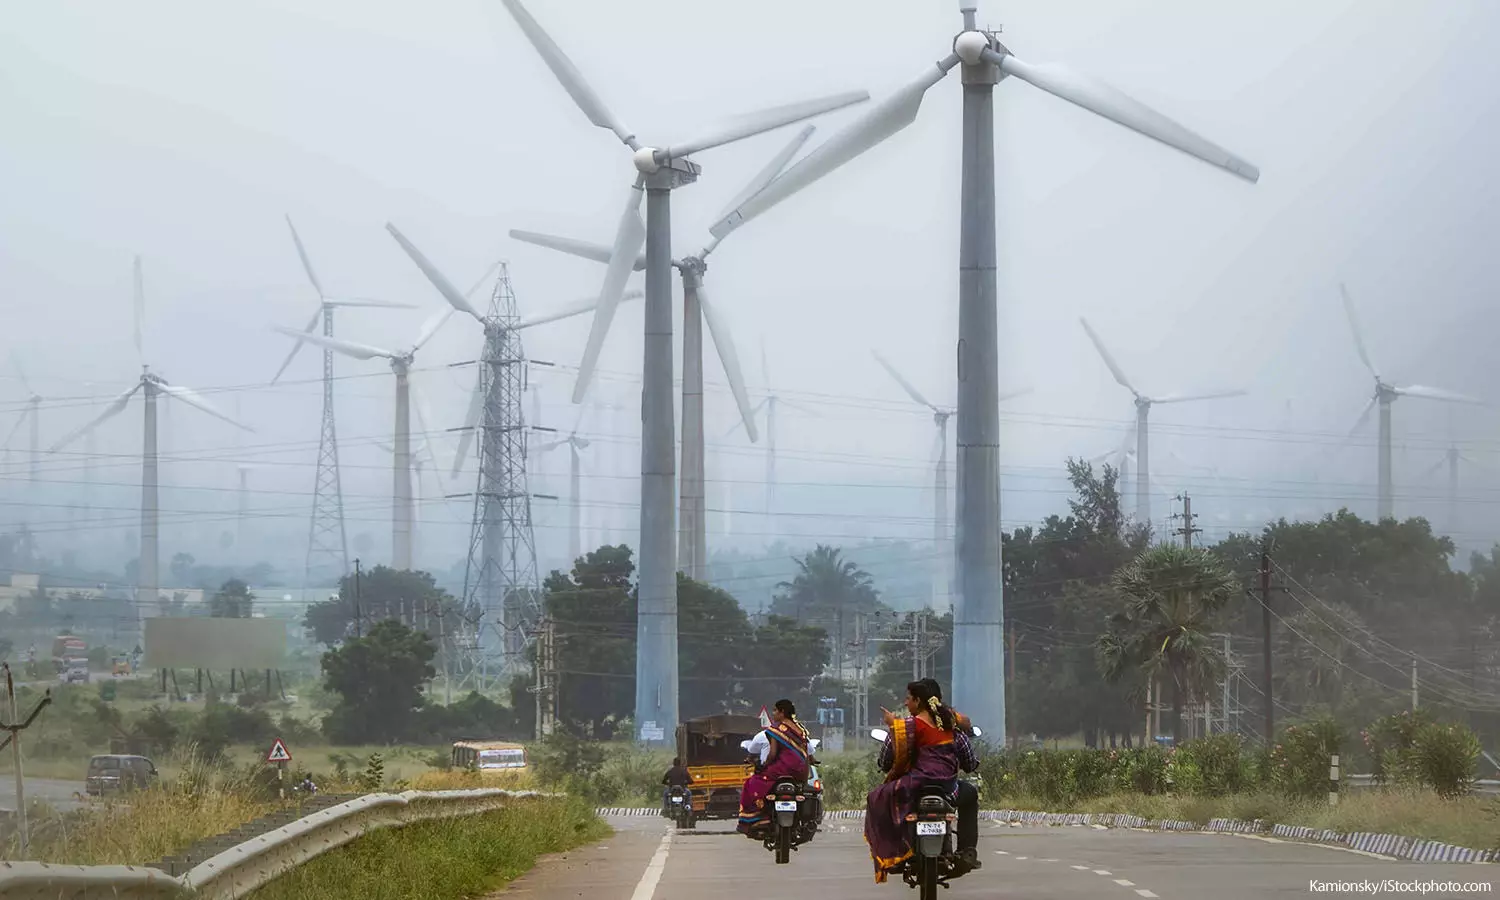 Explained: Why Repowering India's Wind Turbines Will Need More Than Just A  Policy